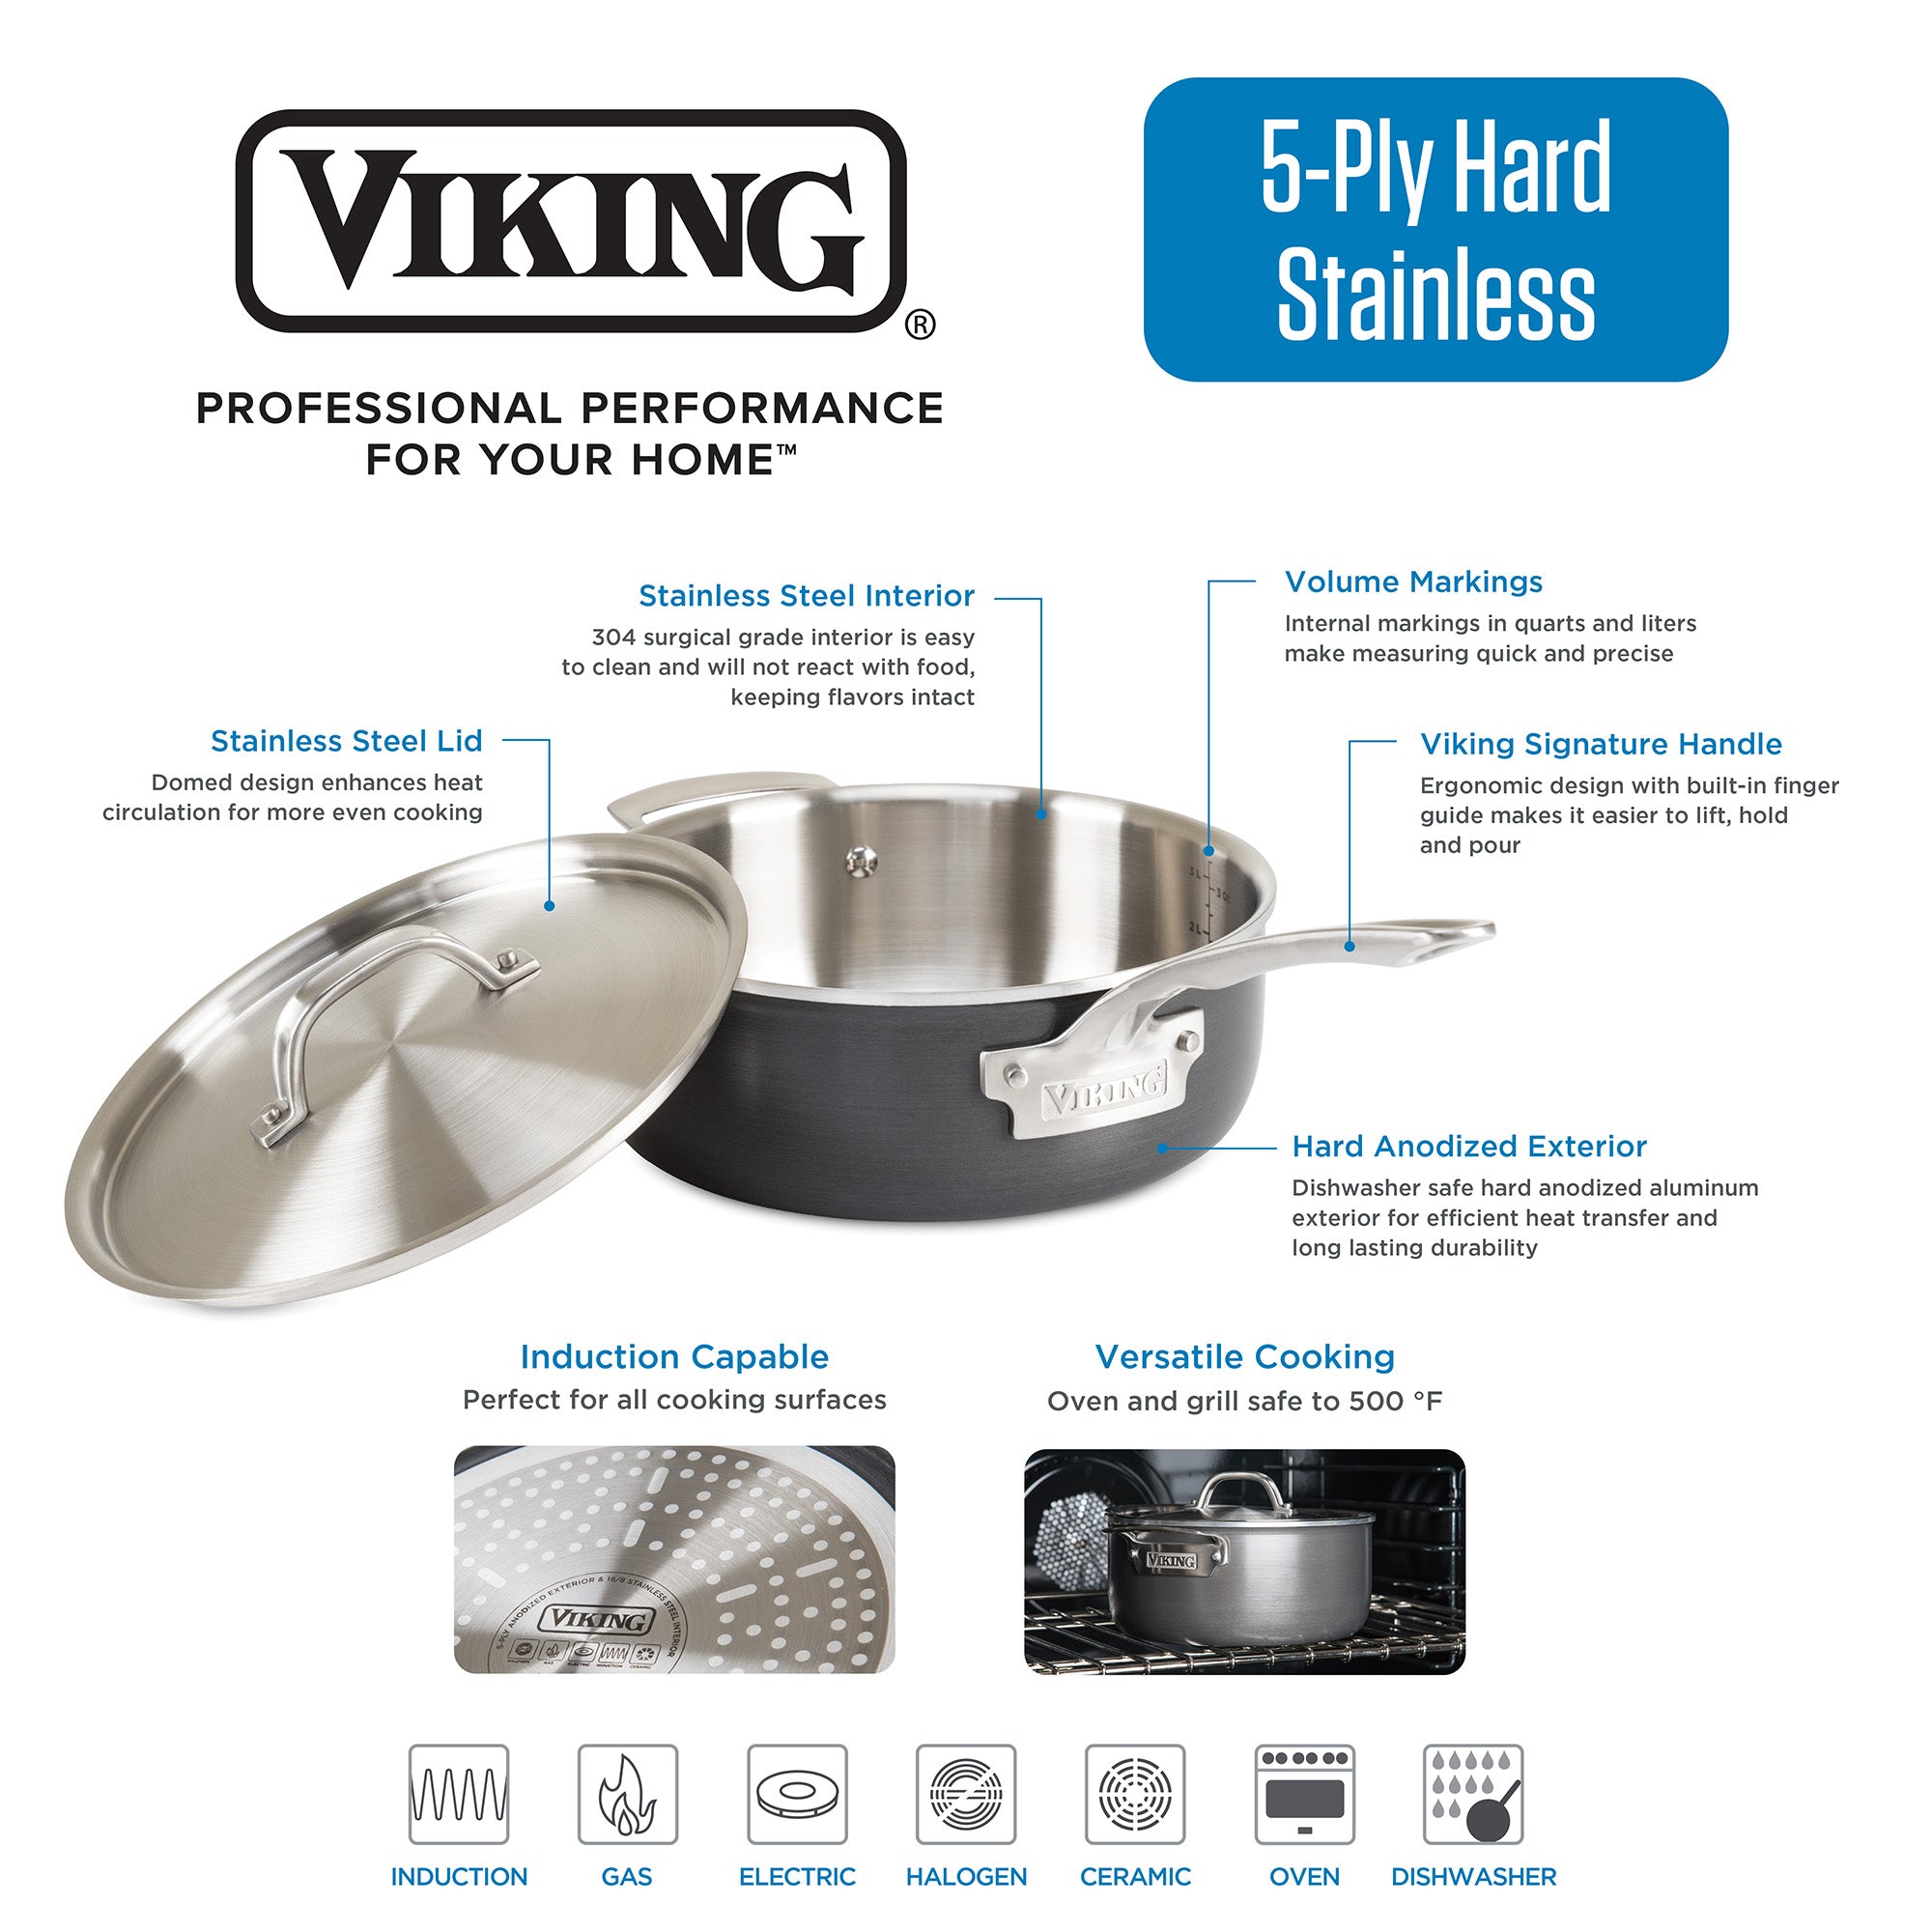 Viking 5-Ply 10-Piece Hard Anodized Stainless Steel Cookware Set with Stainless Lids